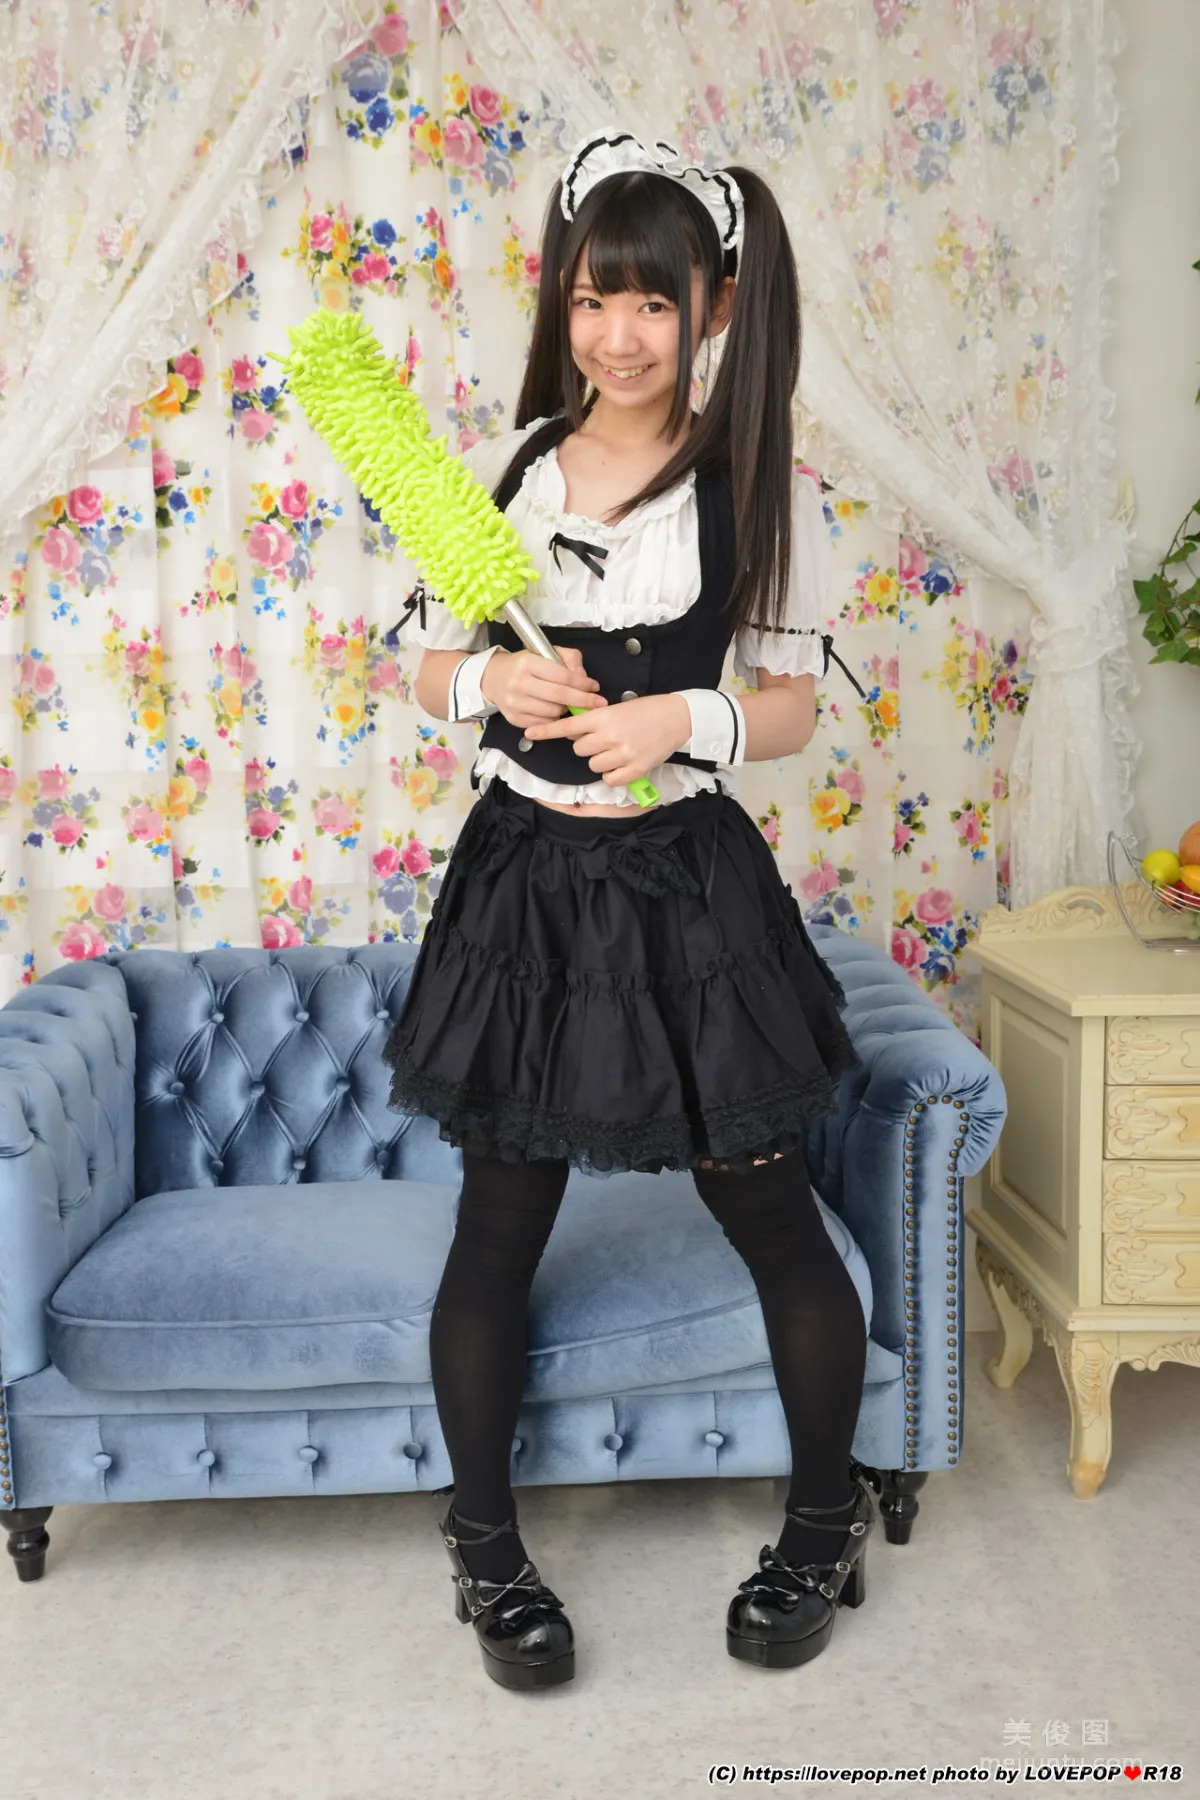 [LOVEPOP] Special Maid Collection - 白井ゆずか Photoset 0211